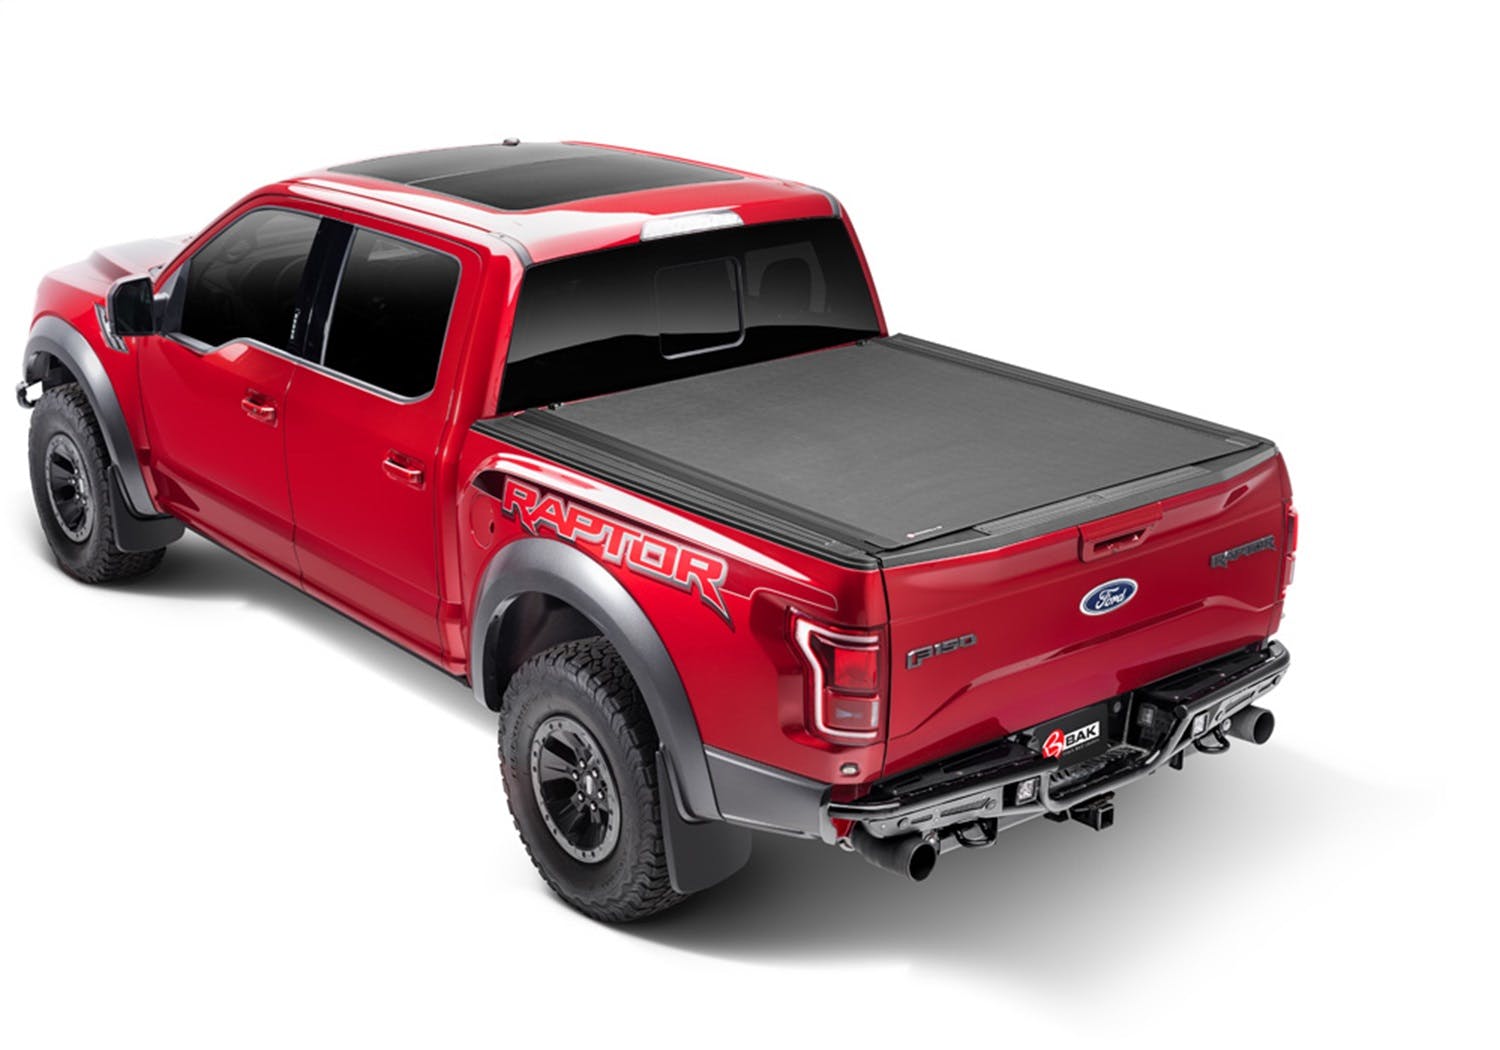 BAK Industries 80504 Revolver X4s Hard Rolling Truck Bed Cover